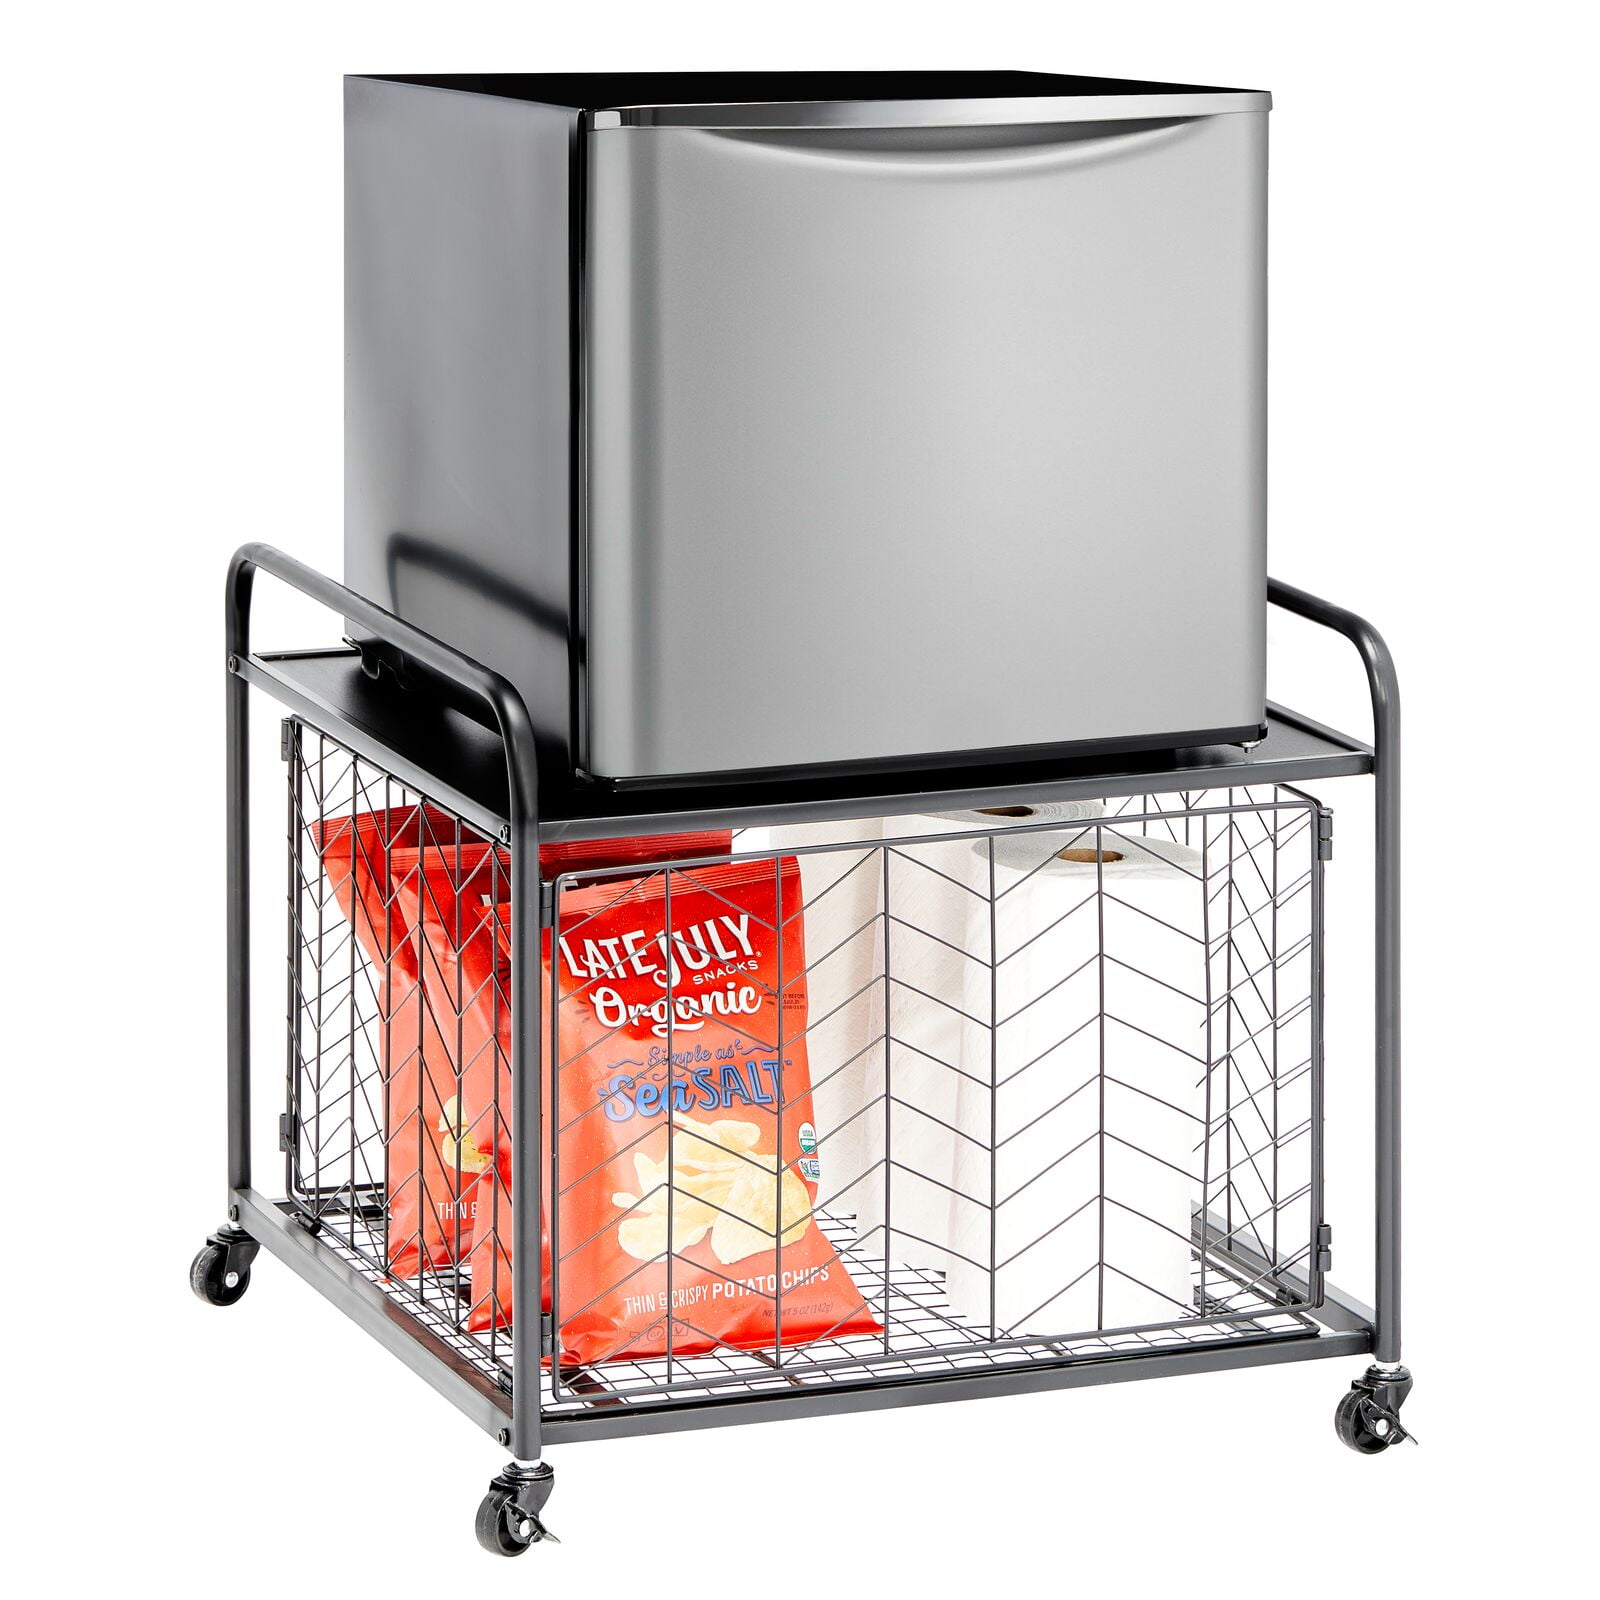 mDesign Small Portable Mini Fridge Storage Cart with Wheels and Drawers - Black